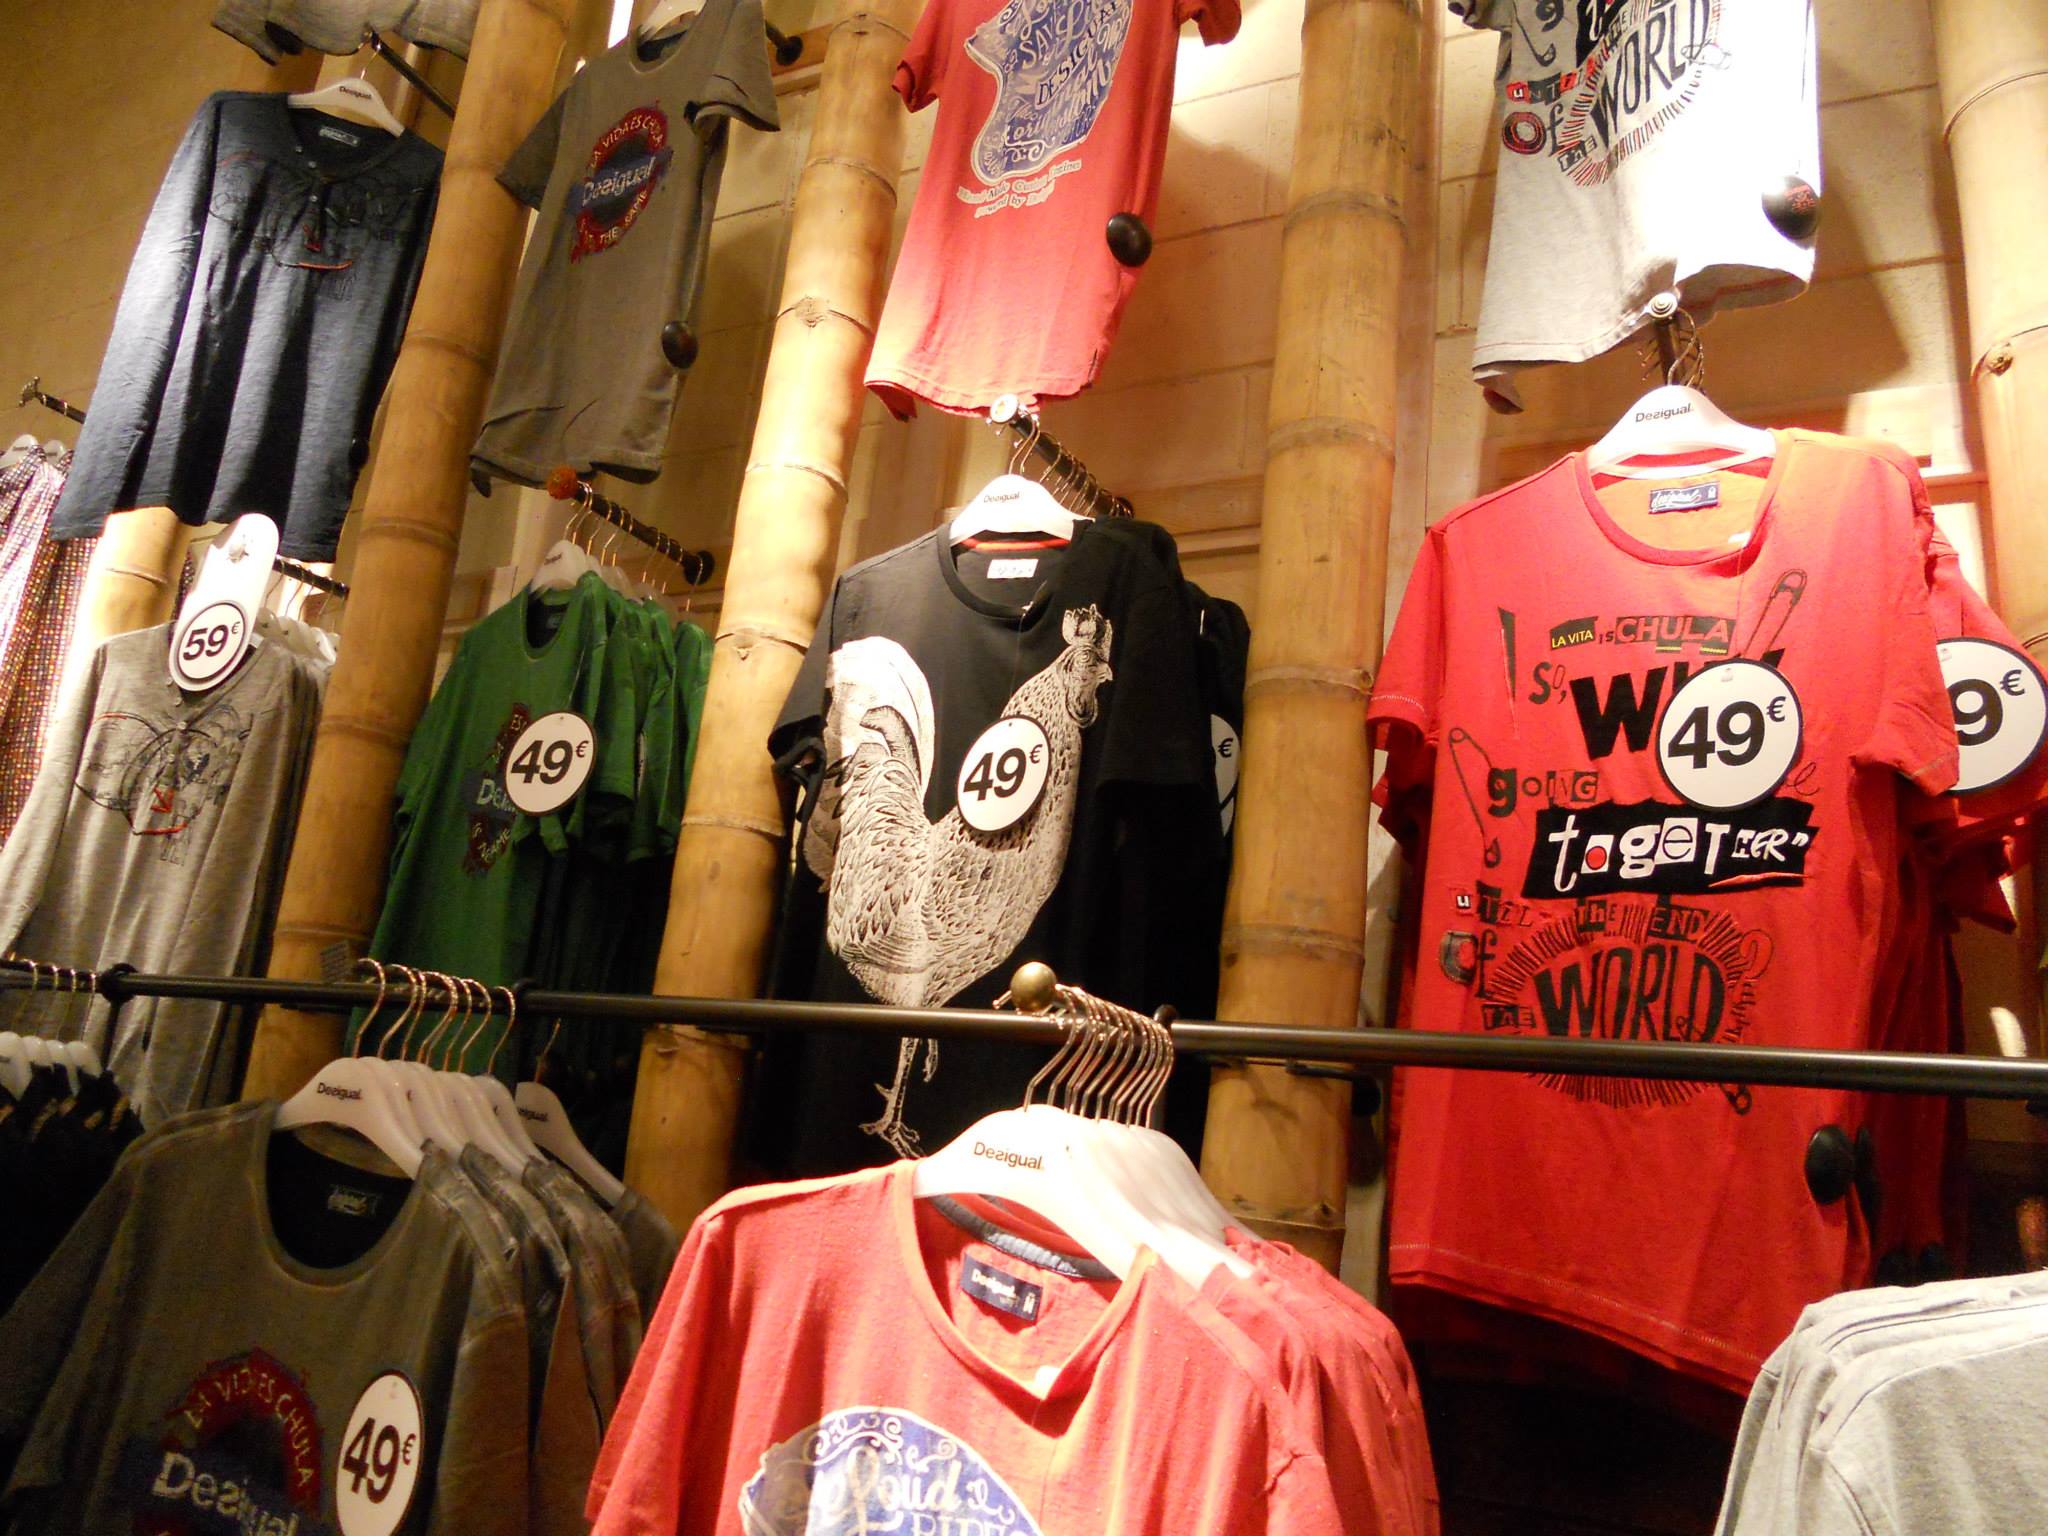 desigual-price-of-personality-t-shirt-wall